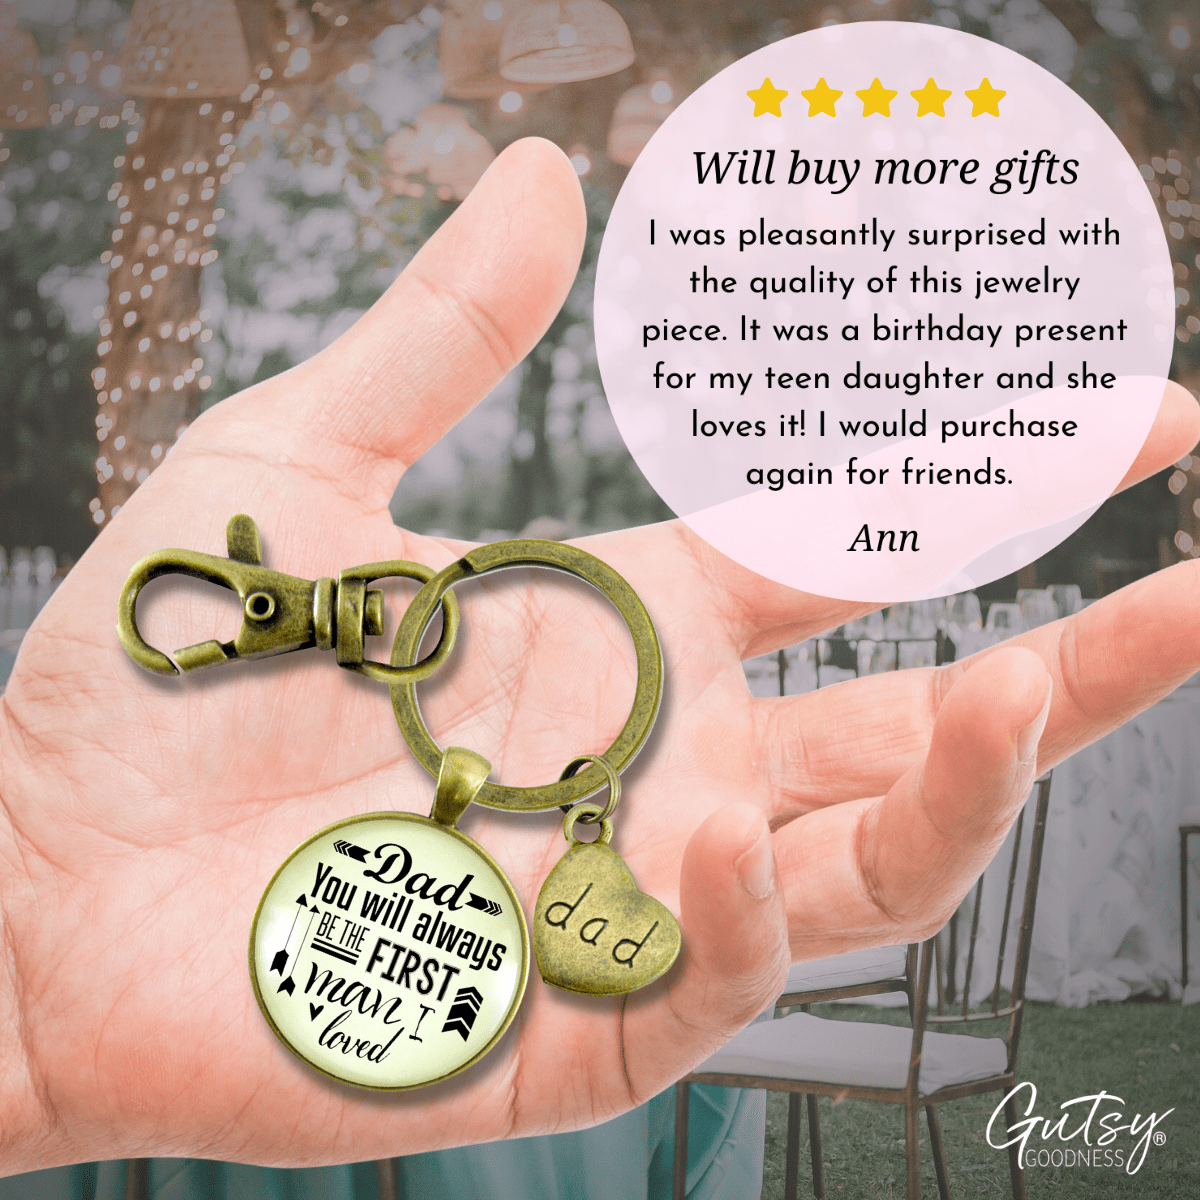 Dad Keychain Sentimental You Will Always Be The First Man I Loved Father Gift - Gutsy Goodness